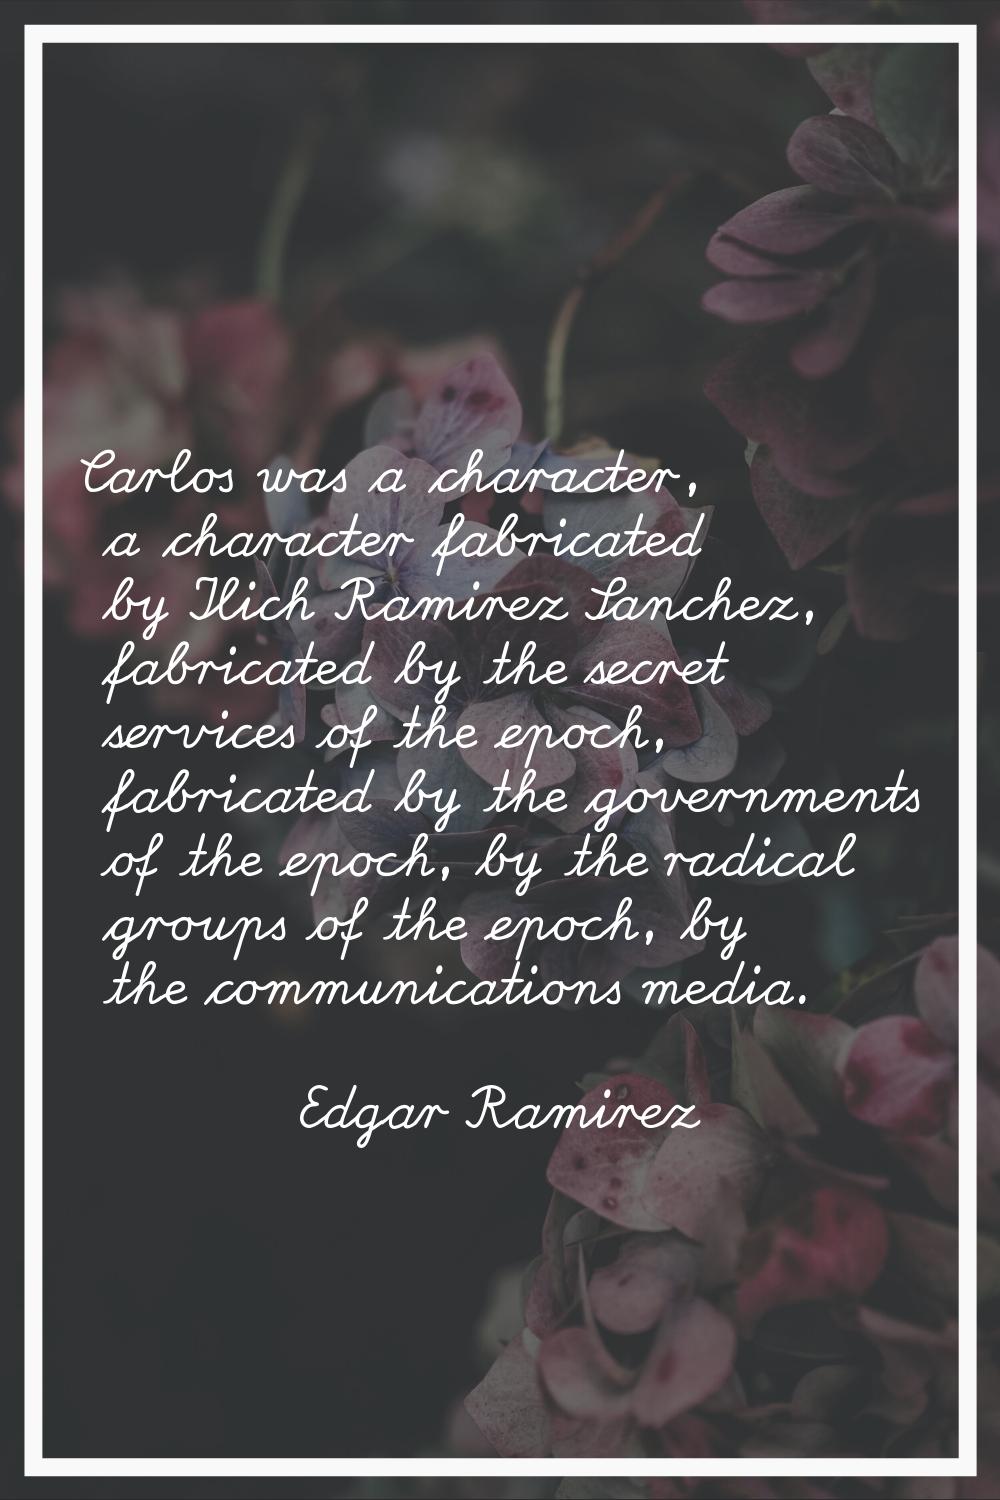 Carlos was a character, a character fabricated by Ilich Ramirez Sanchez, fabricated by the secret s